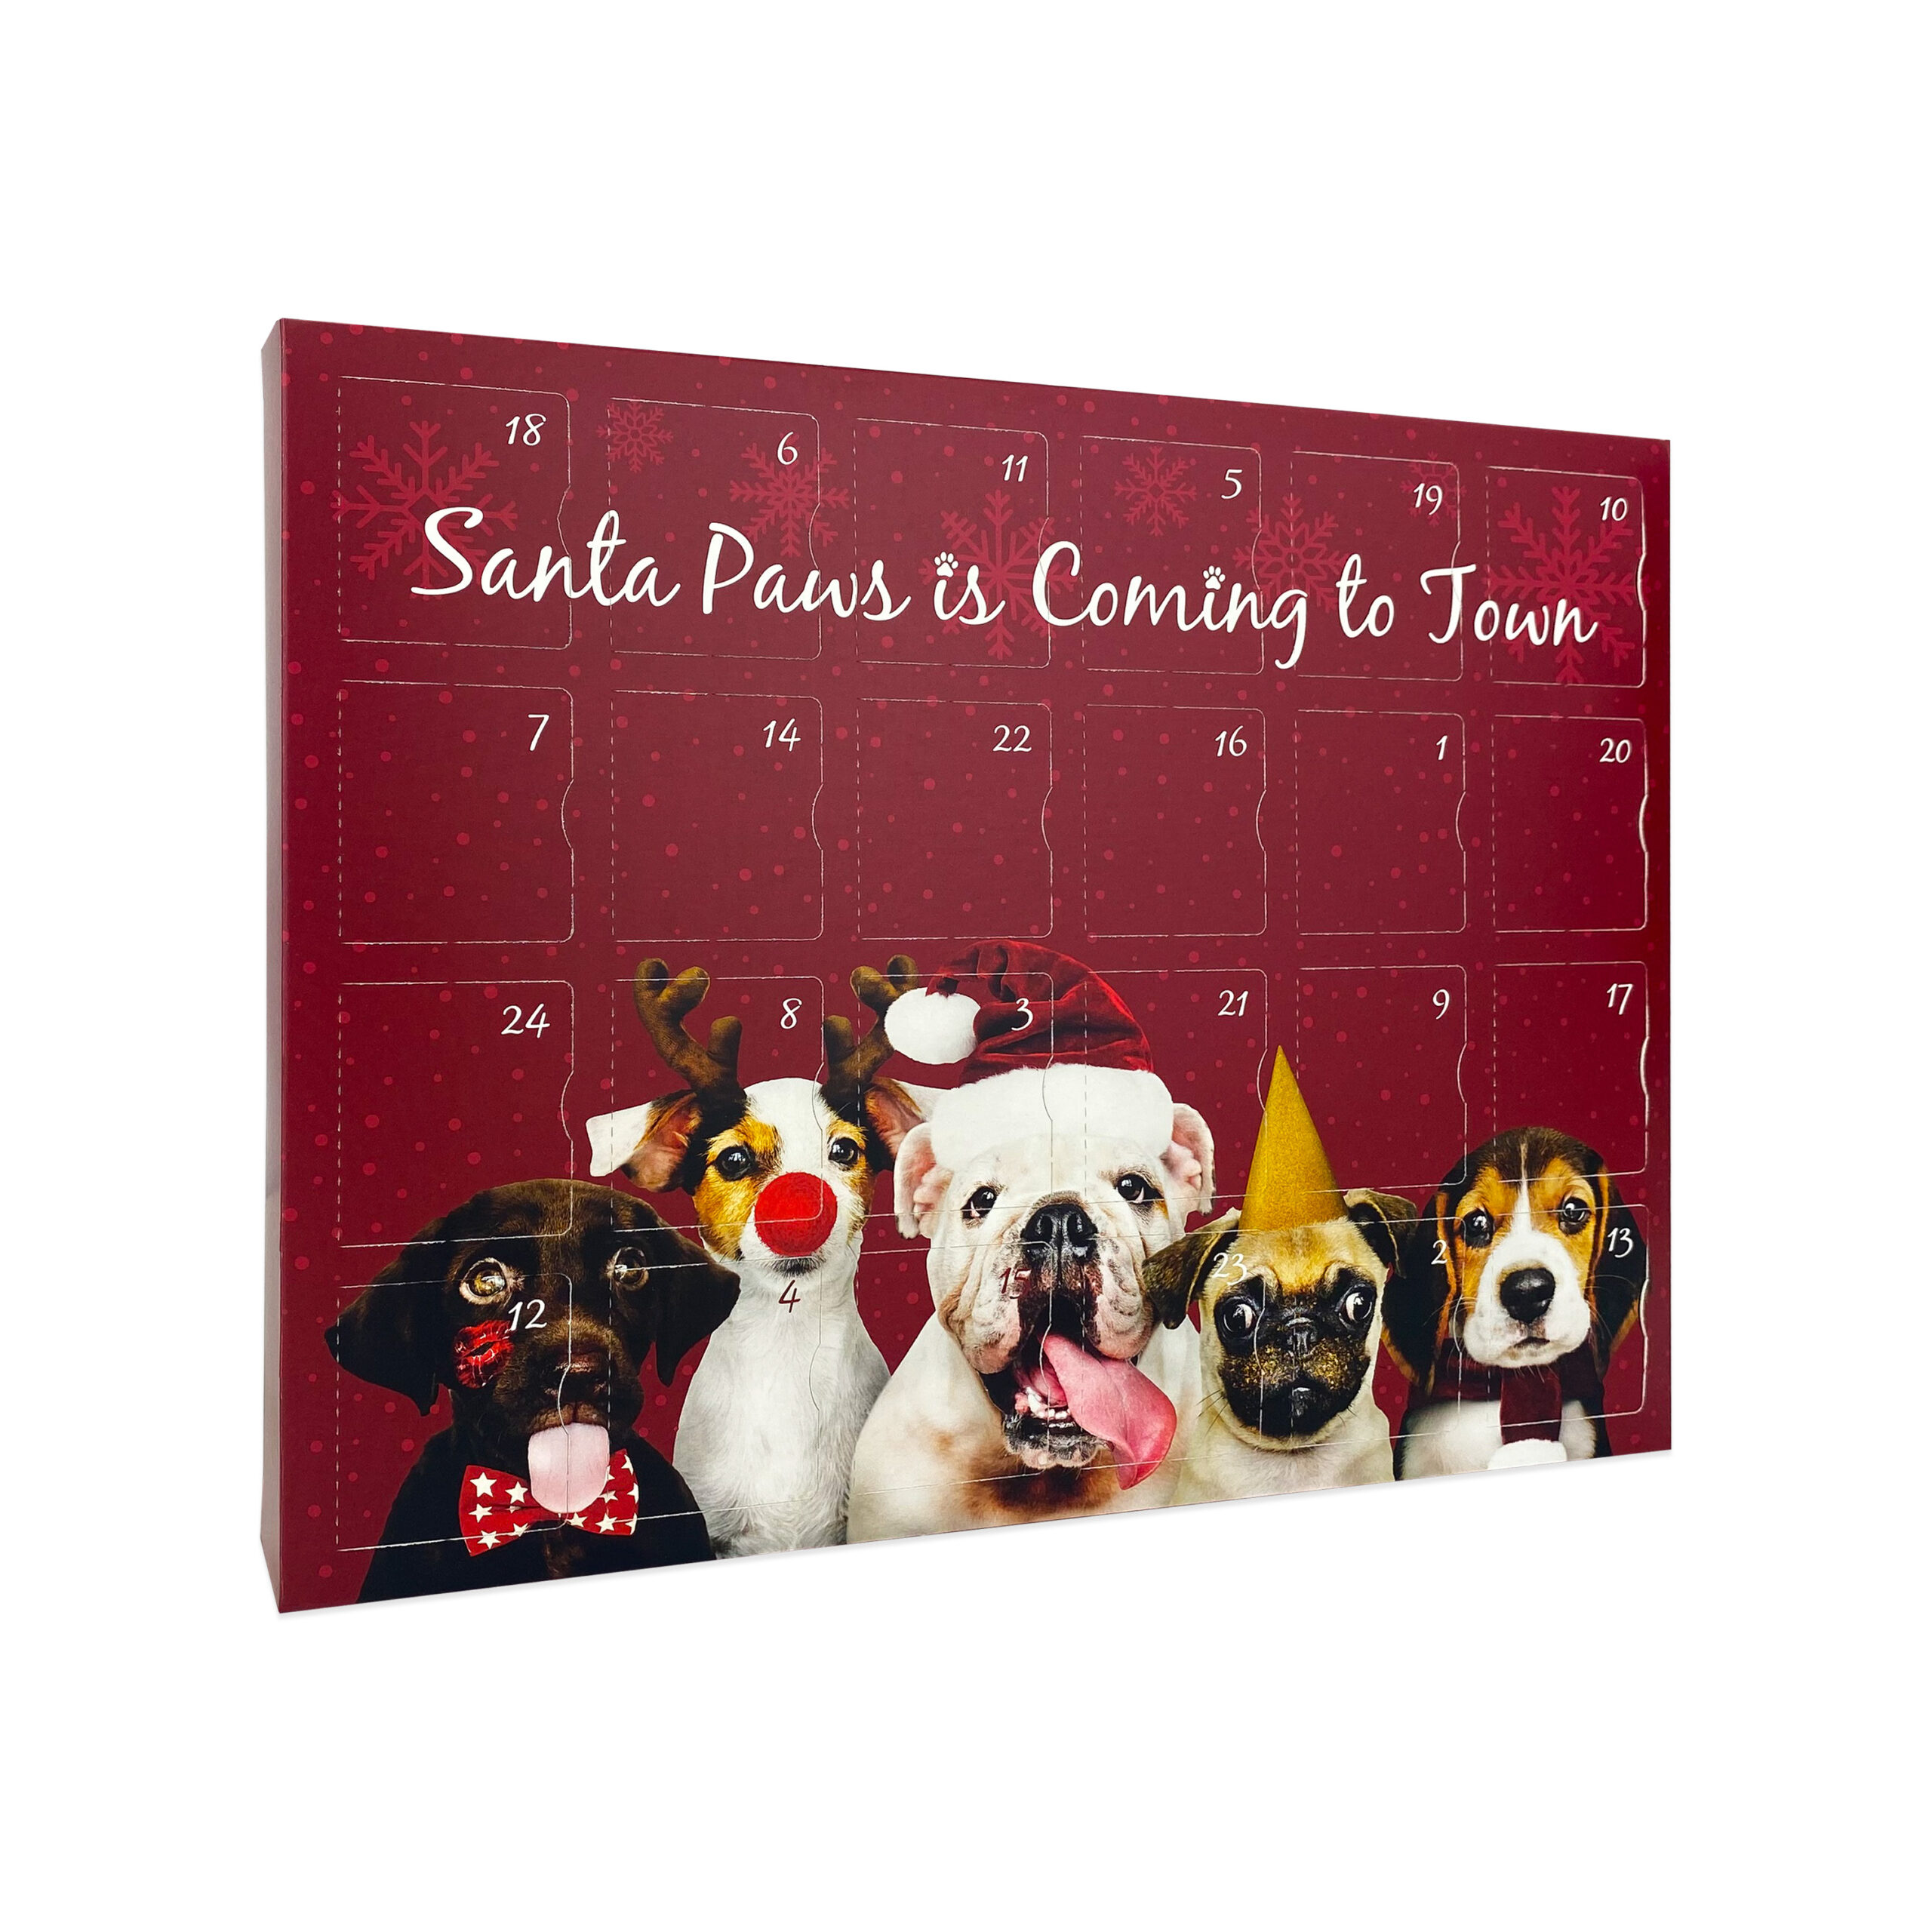 24 day deep red santa paws dog themed advent calendar. Fill it with dog treats